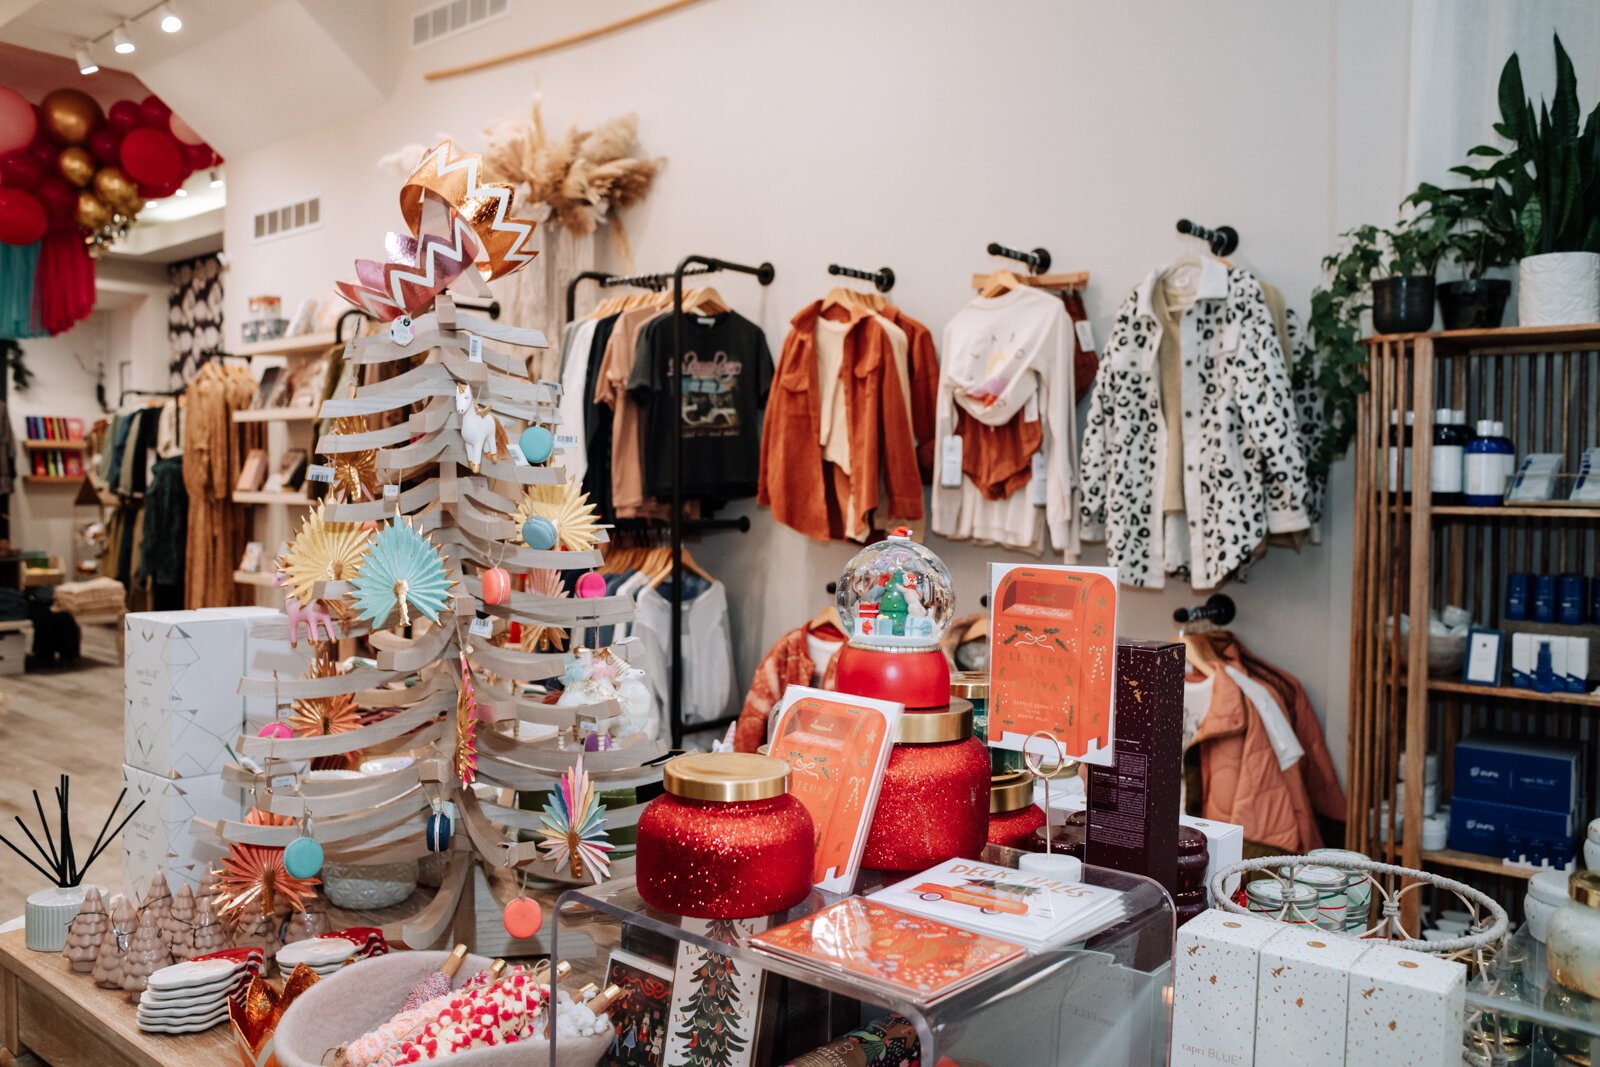 Elysian Co. at 110 E. Center St. in Warsaw features a wide variety of gift options.